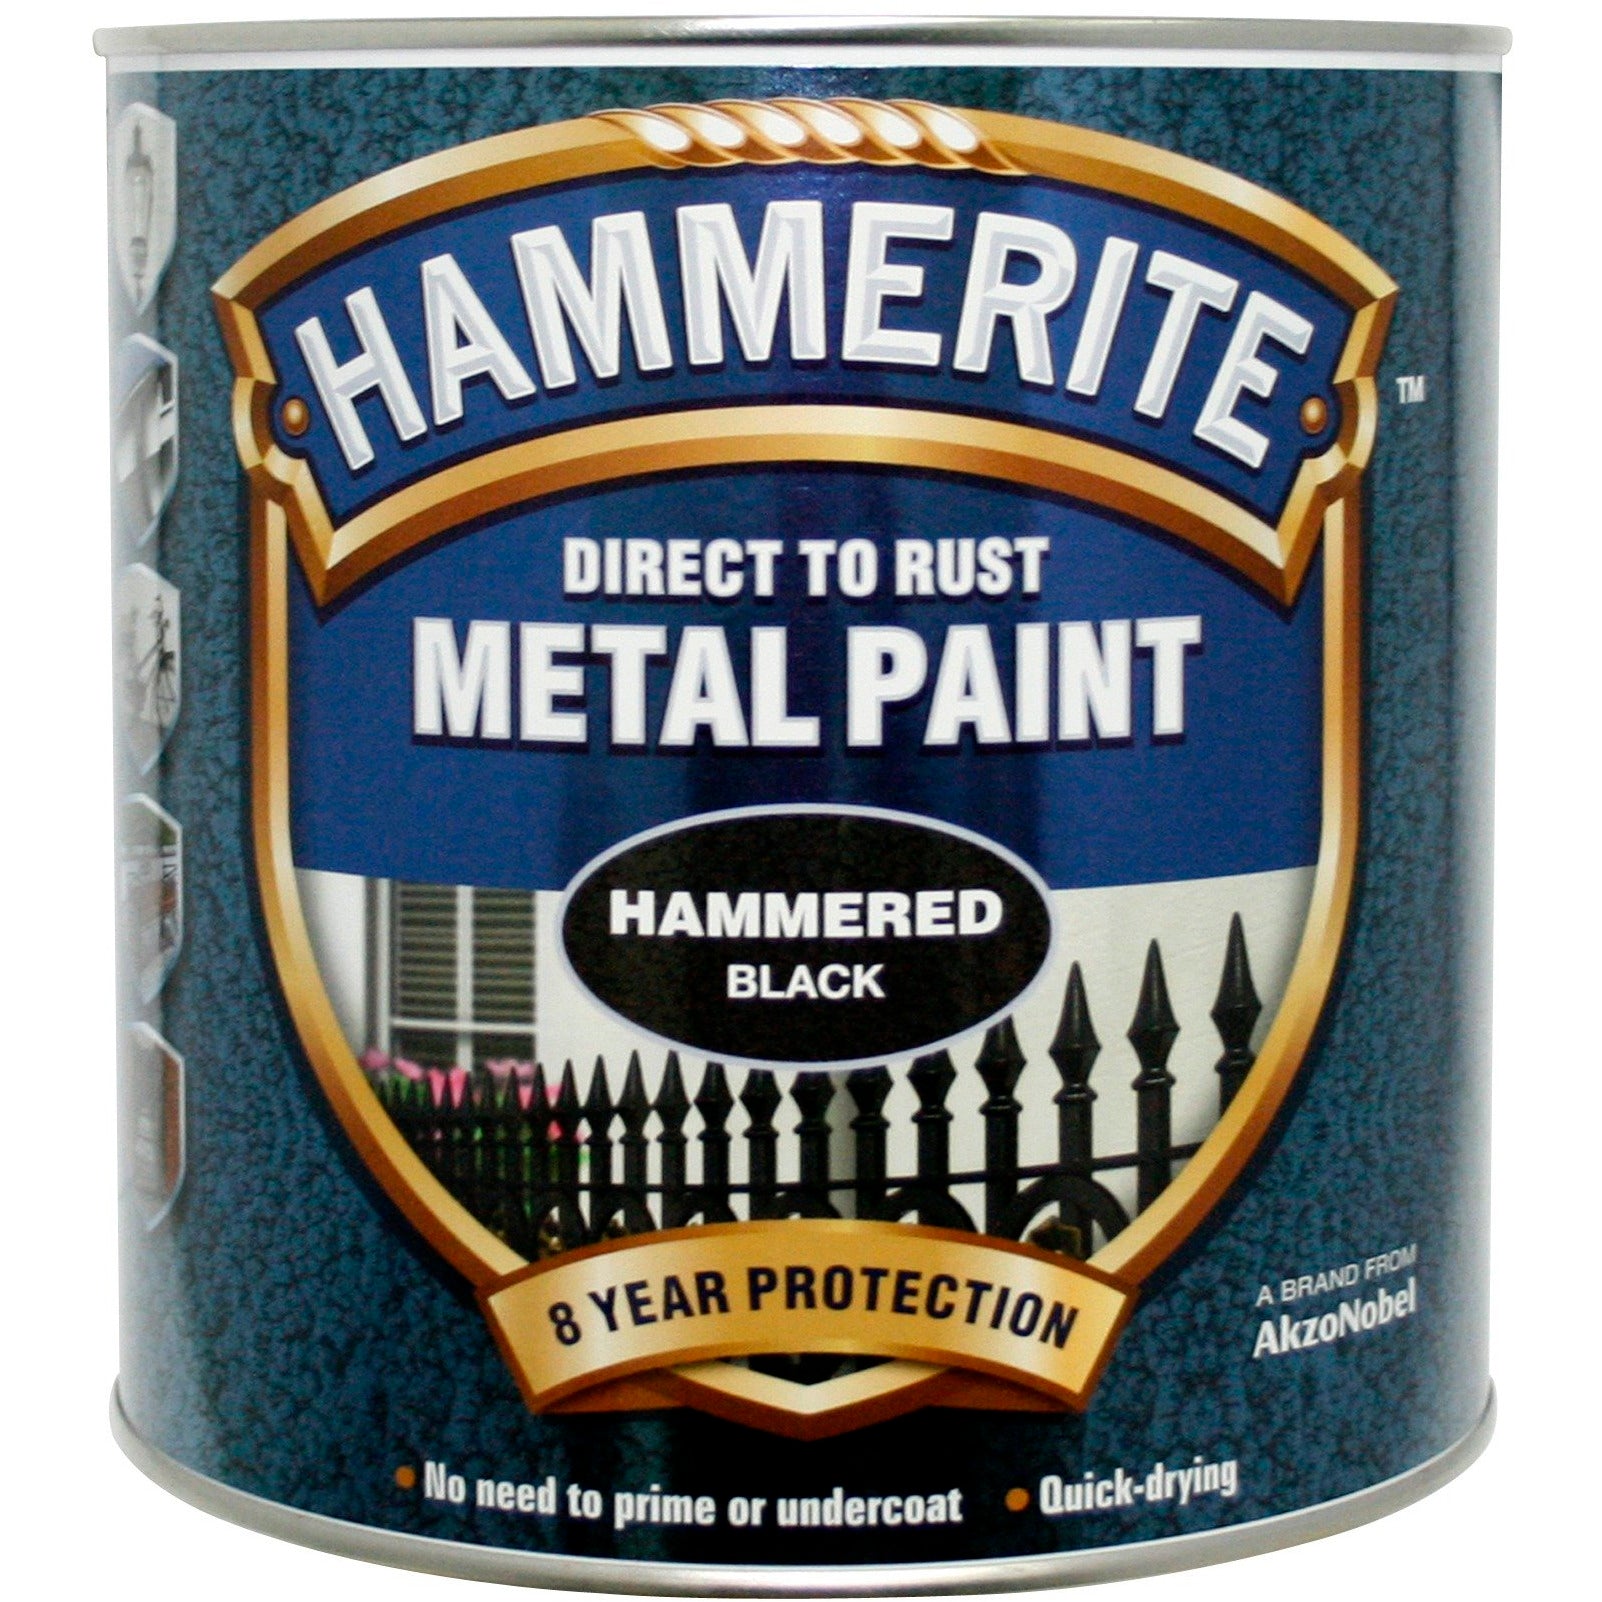 Hammerite Direct to Rust Metal Paint Hammered Black 2.5Litre-Metal Protection & Paint-Tool Factory